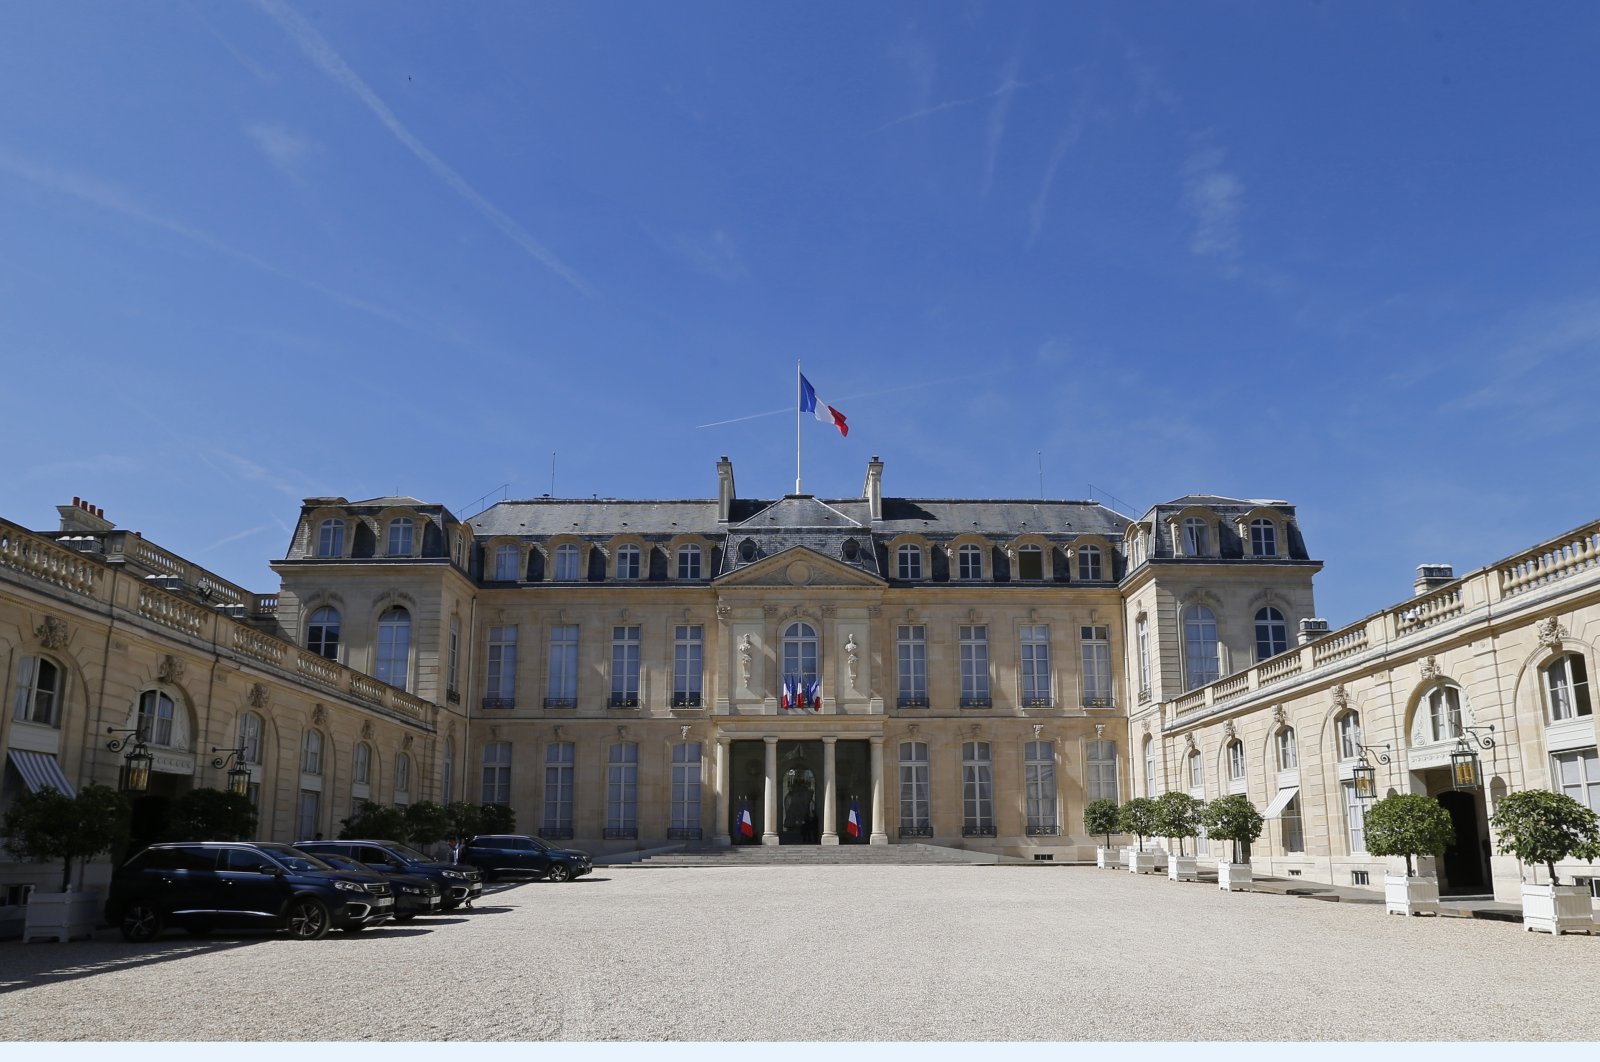 The courtyard of the Elysee Palace is pictured in Paris, France, July 5, 2019. (AP Photo)